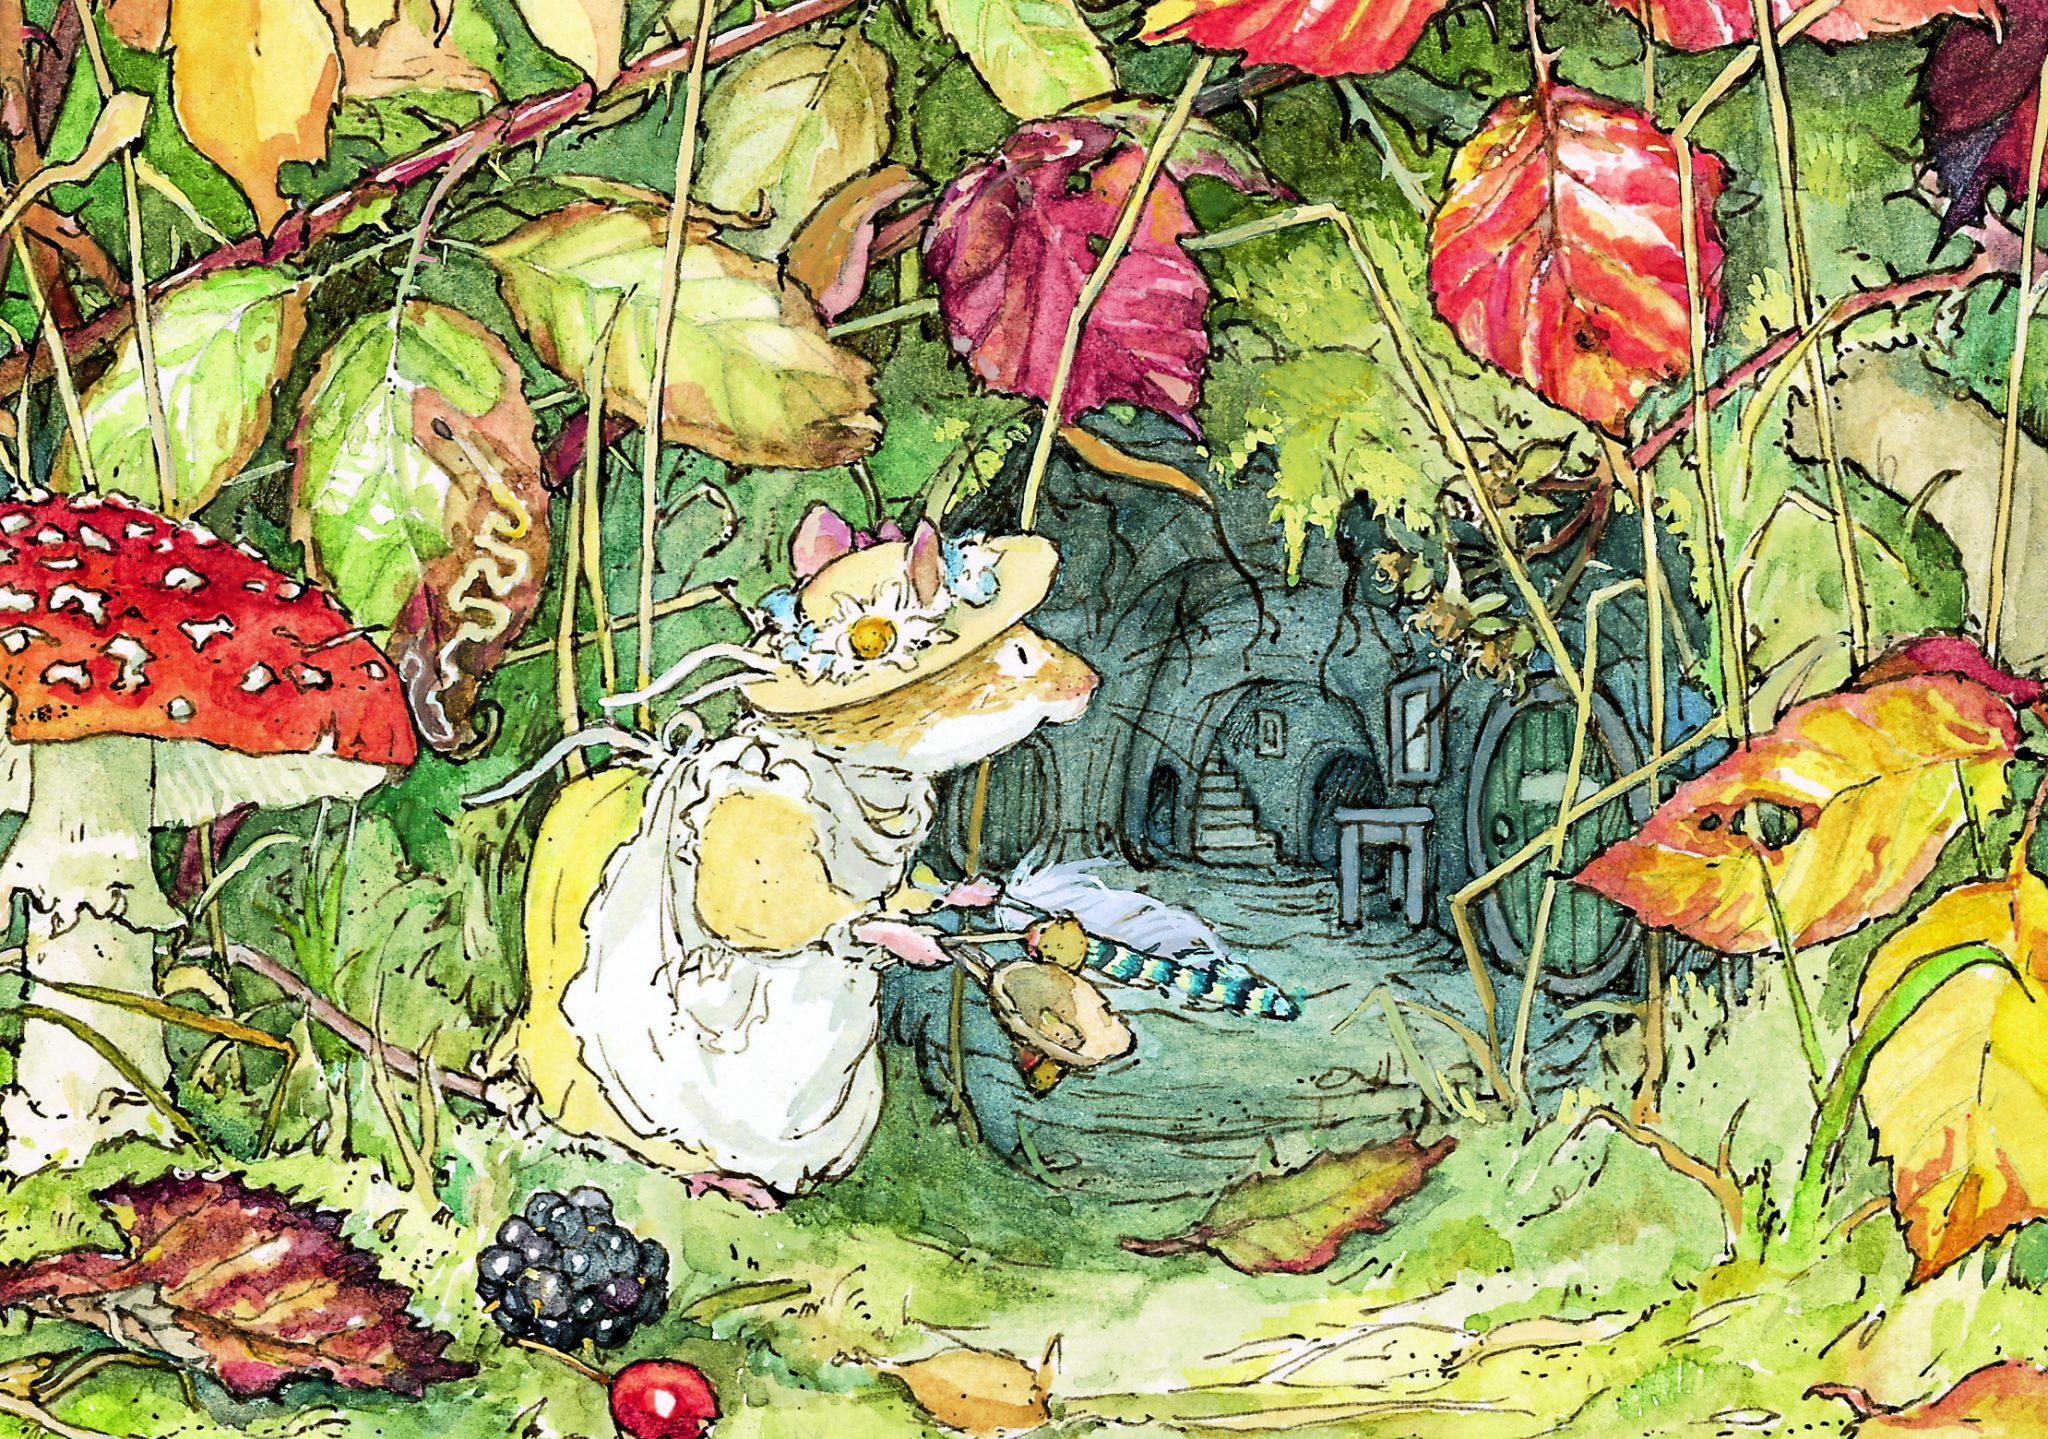 Lupus Films to help bring Brambly Hedge tales to TV